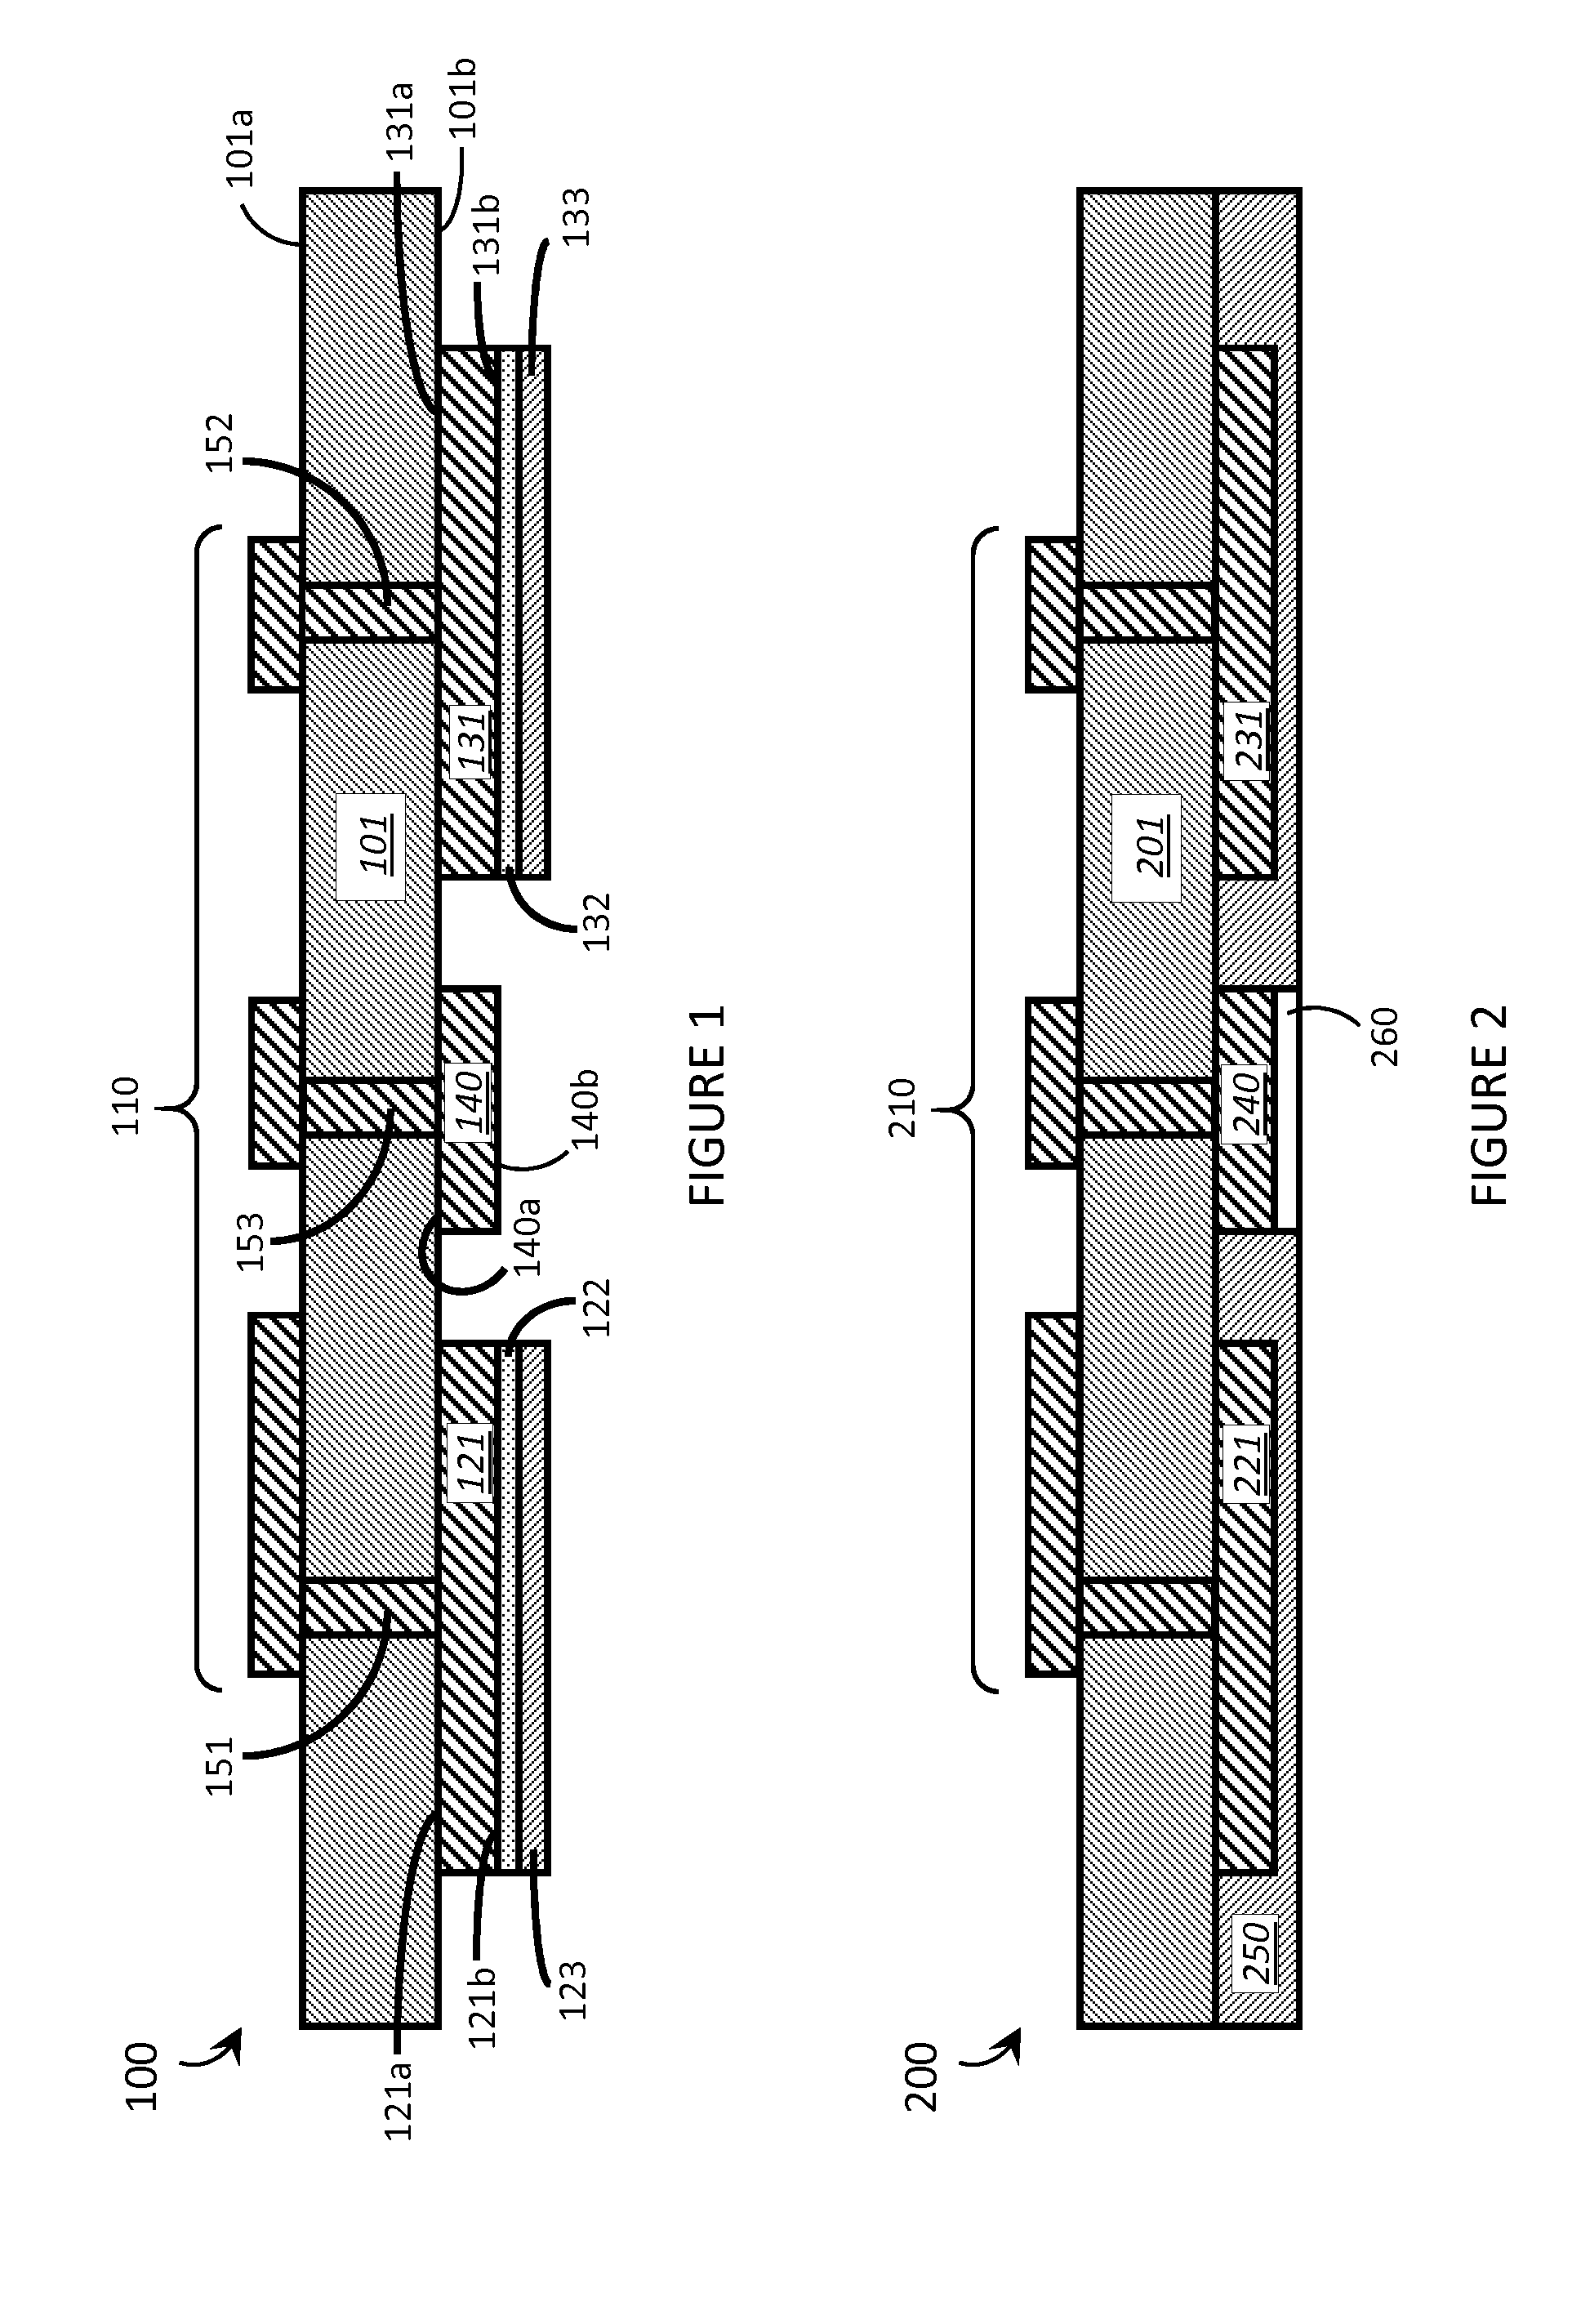 Systems, articles, and methods for capacitive electromyography sensors